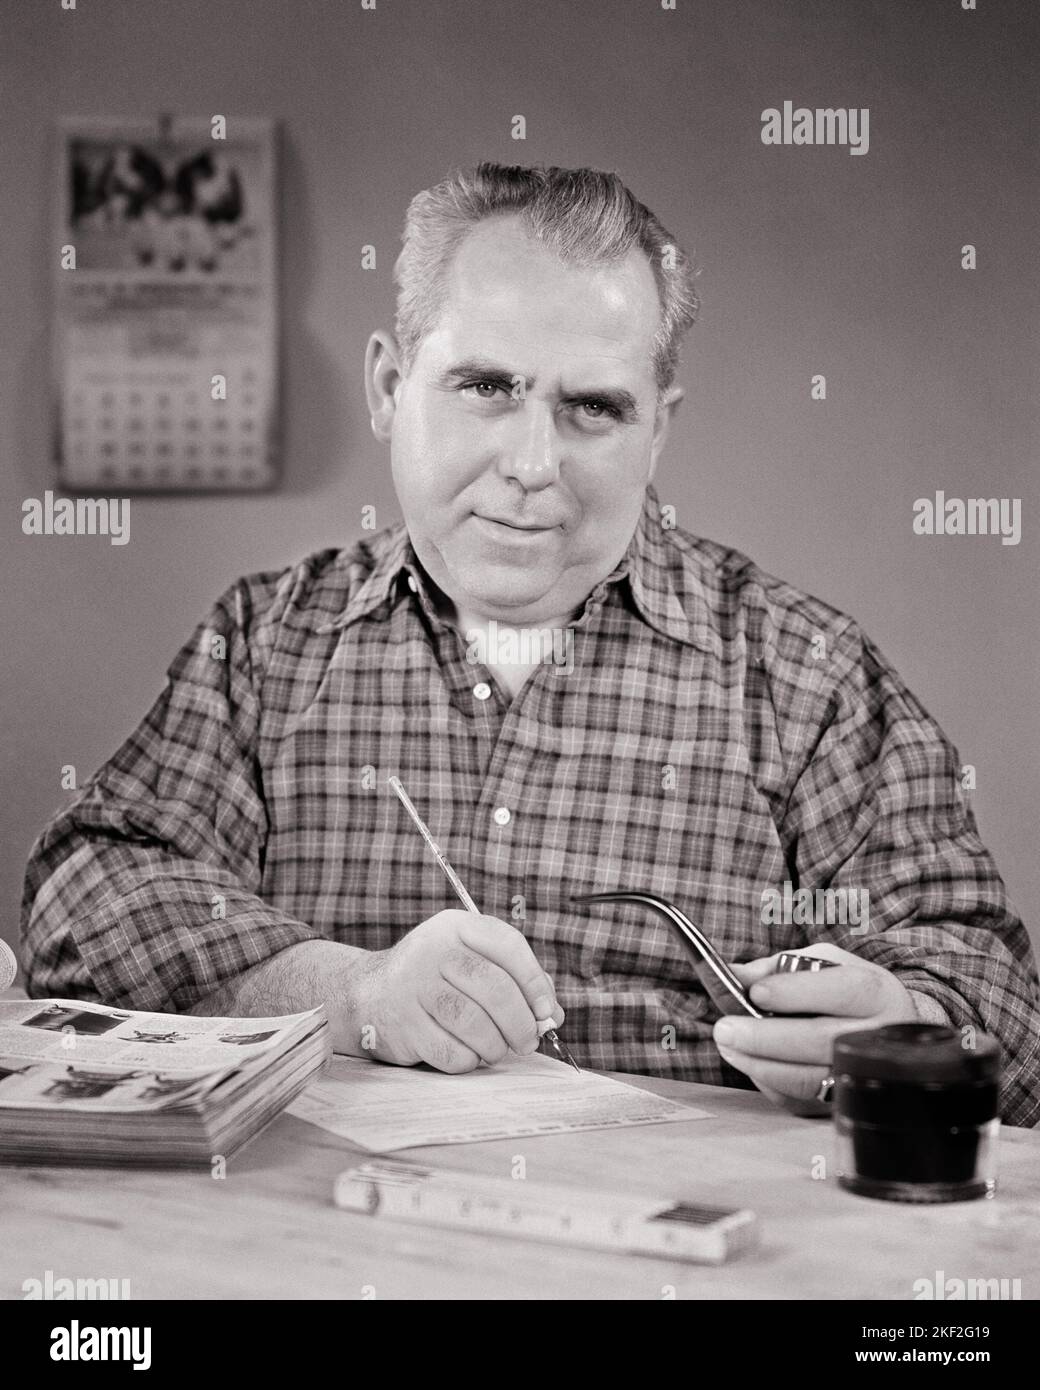 1940s MATURE MAN SITTING AT DESK WRITING AN ORDER FROM AN OPEN CATALOG WITH STEEL TIP PEN HOLDING A PIPE LOOKING AT CAMERA - s11119 HAR001 HARS MALES PLANNING ORDER EXPRESSIONS MIDDLE-AGED B&W MIDDLE-AGED MAN EYE CONTACT PIPES TOBACCO CHOICE HOPEFUL BAD HABIT OCCUPATIONS SMOKER NICOTINE ADDICTIVE TIP CATALOG PURCHASING ORDERING RELAXATION BLACK AND WHITE CAUCASIAN ETHNICITY HAR001 OLD FASHIONED Stock Photo